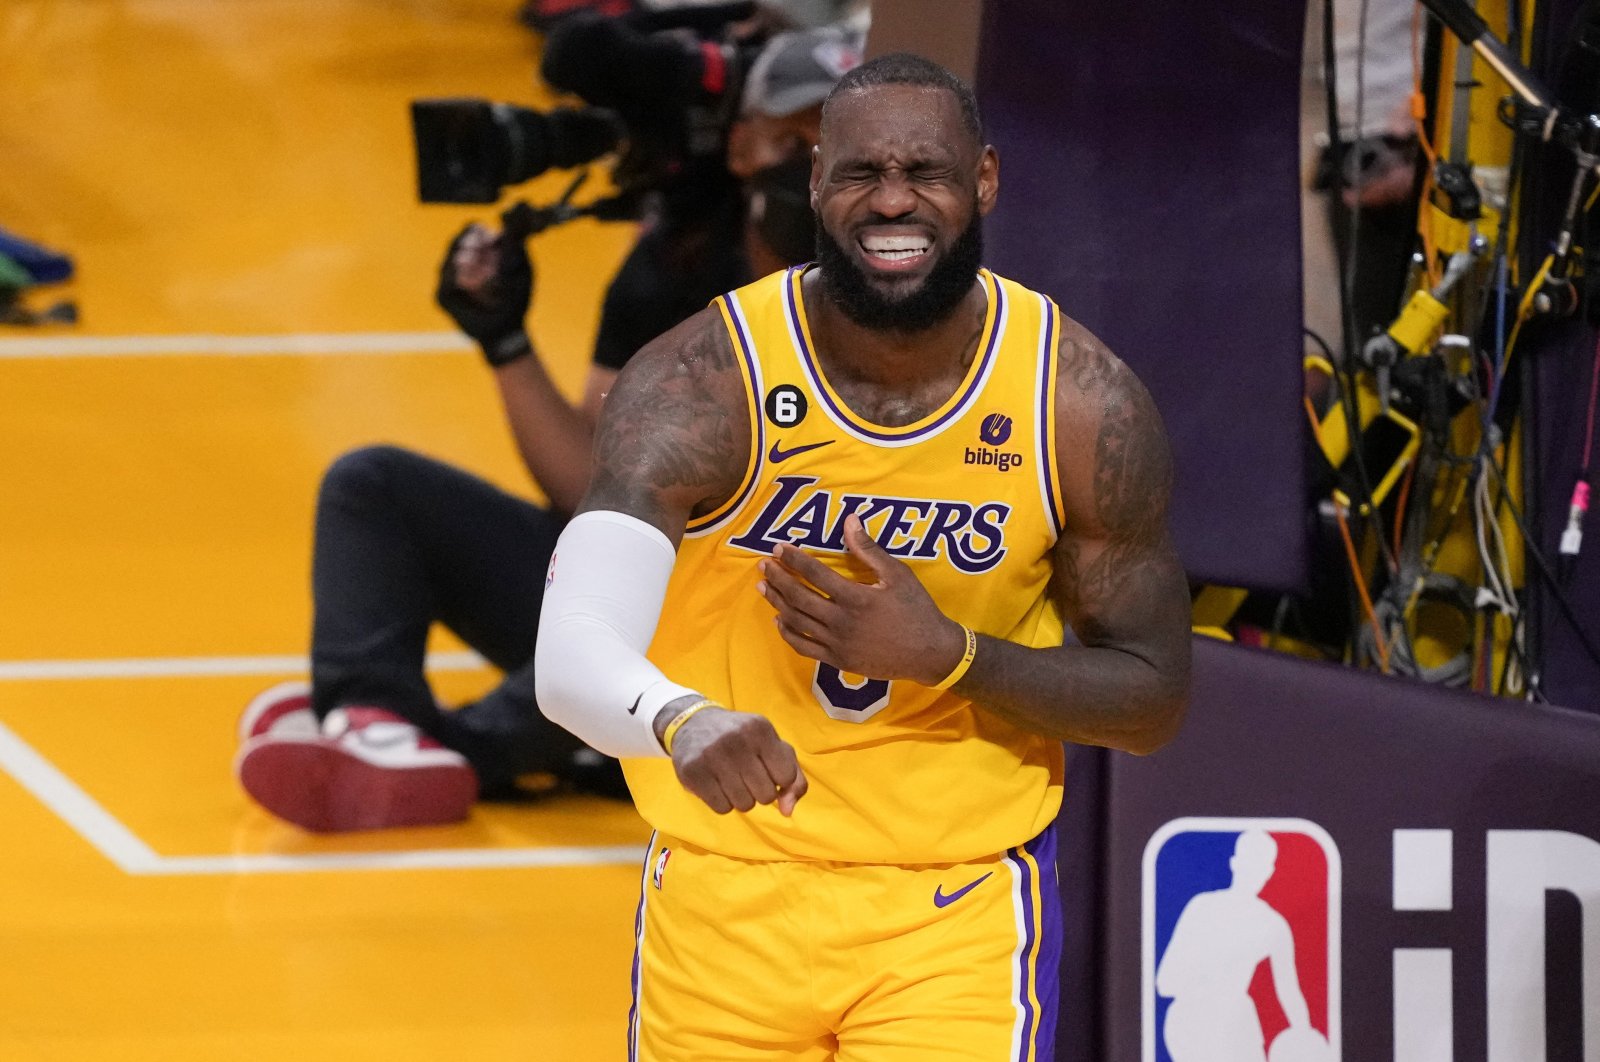 Los Angeles Lakers forward LeBron James reacts to a play against the Denver Nuggets during the fourth quarter in game four of the Western Conference Finals for the 2023 NBA playoffs at Crypto.com Arena, Los Angeles, U.S., May 22, 2023. (Reuters Photo)